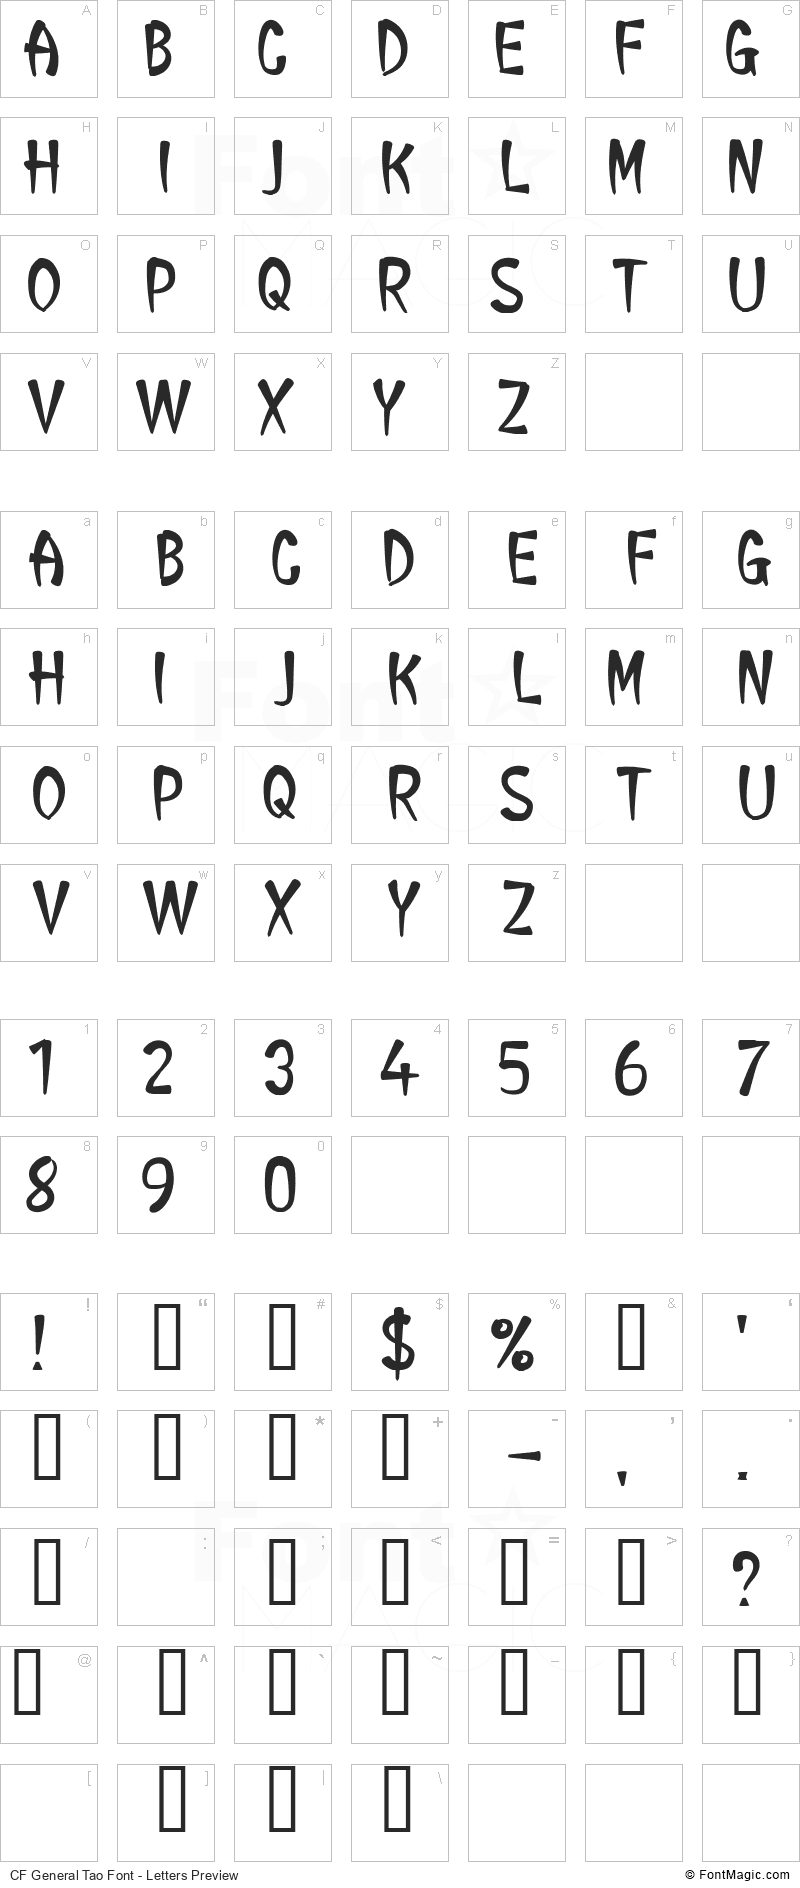 CF General Tao Font - All Latters Preview Chart